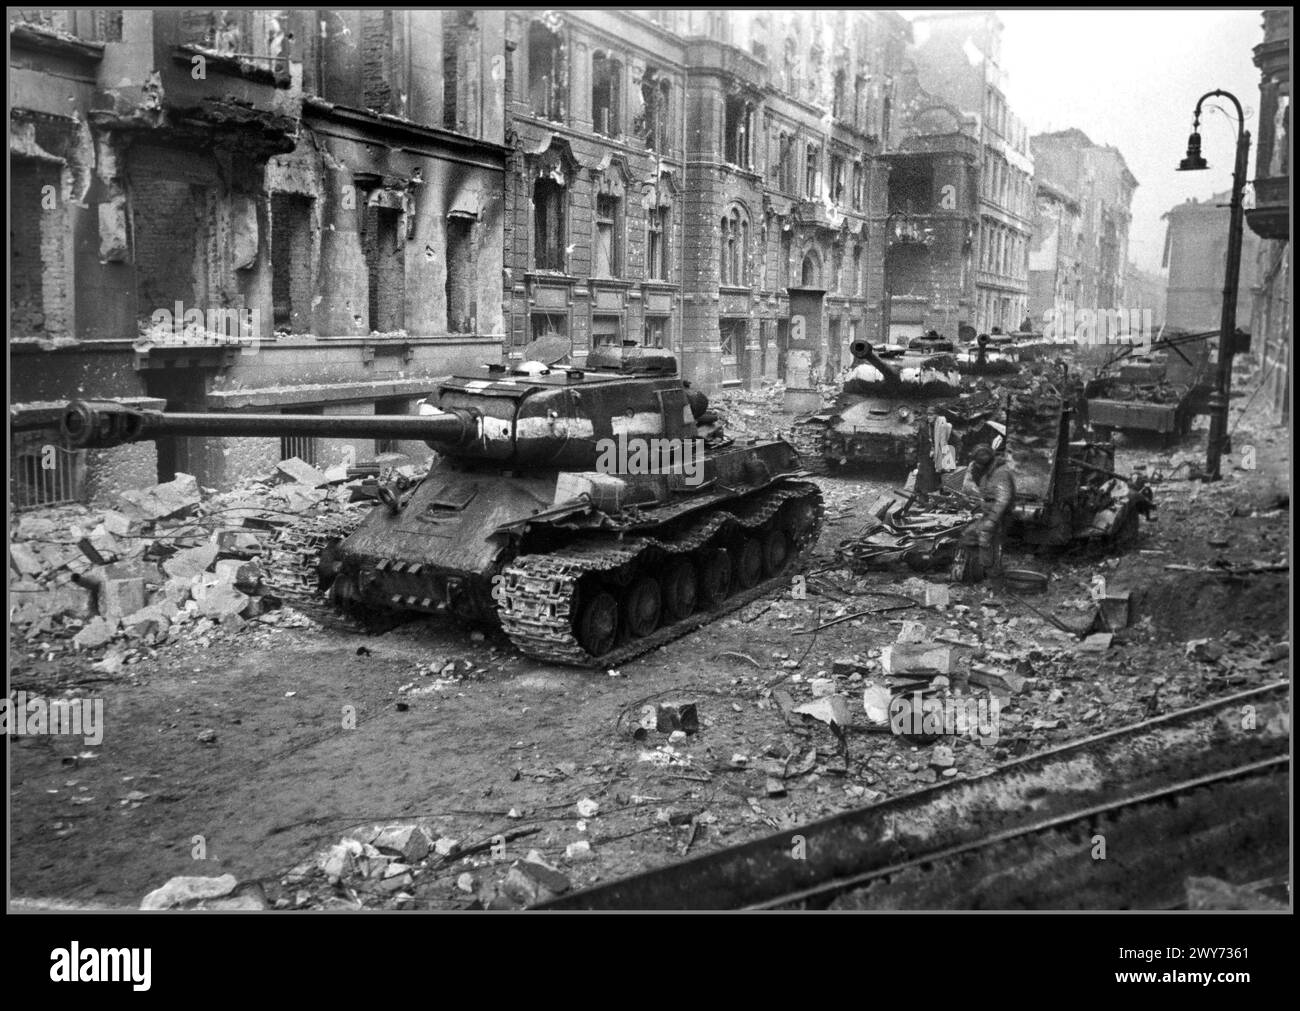 TANKS WW2 Nazi Berlin falling to Russian Soviet USSR overwhelming force as a column of Soviet heavy tanks IS-2's on a heavily bombed and shell damaged street in central Nazi Berlin Germany 1945 The IS-2 is a Soviet heavy tank, the second of the IS tank series named after the Soviet leader Joseph Stalin. It was developed and saw combat during World War II Stock Photo